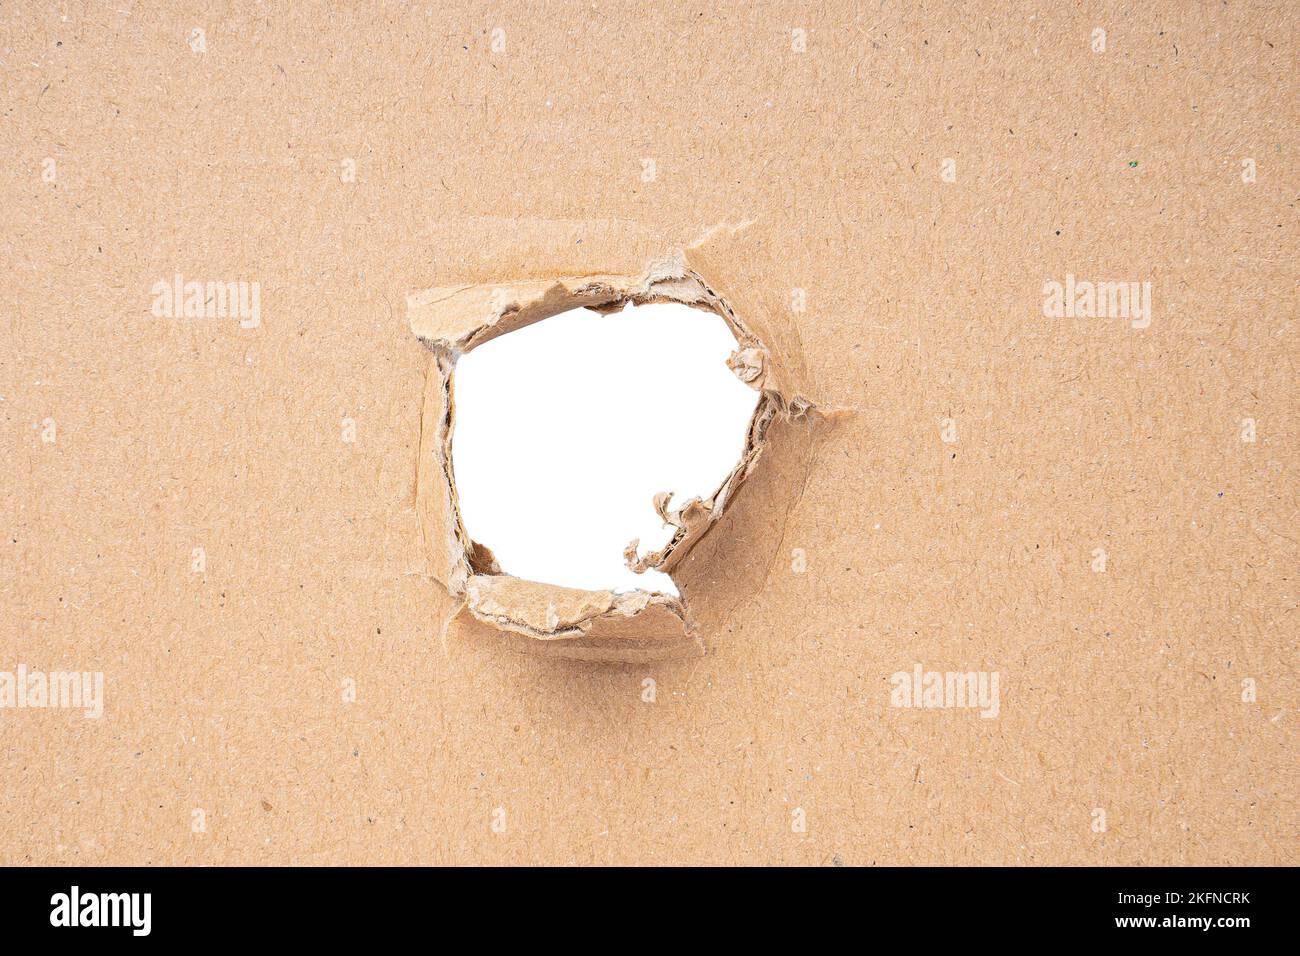 Ripped hole in cardboard on white background Stock Photo